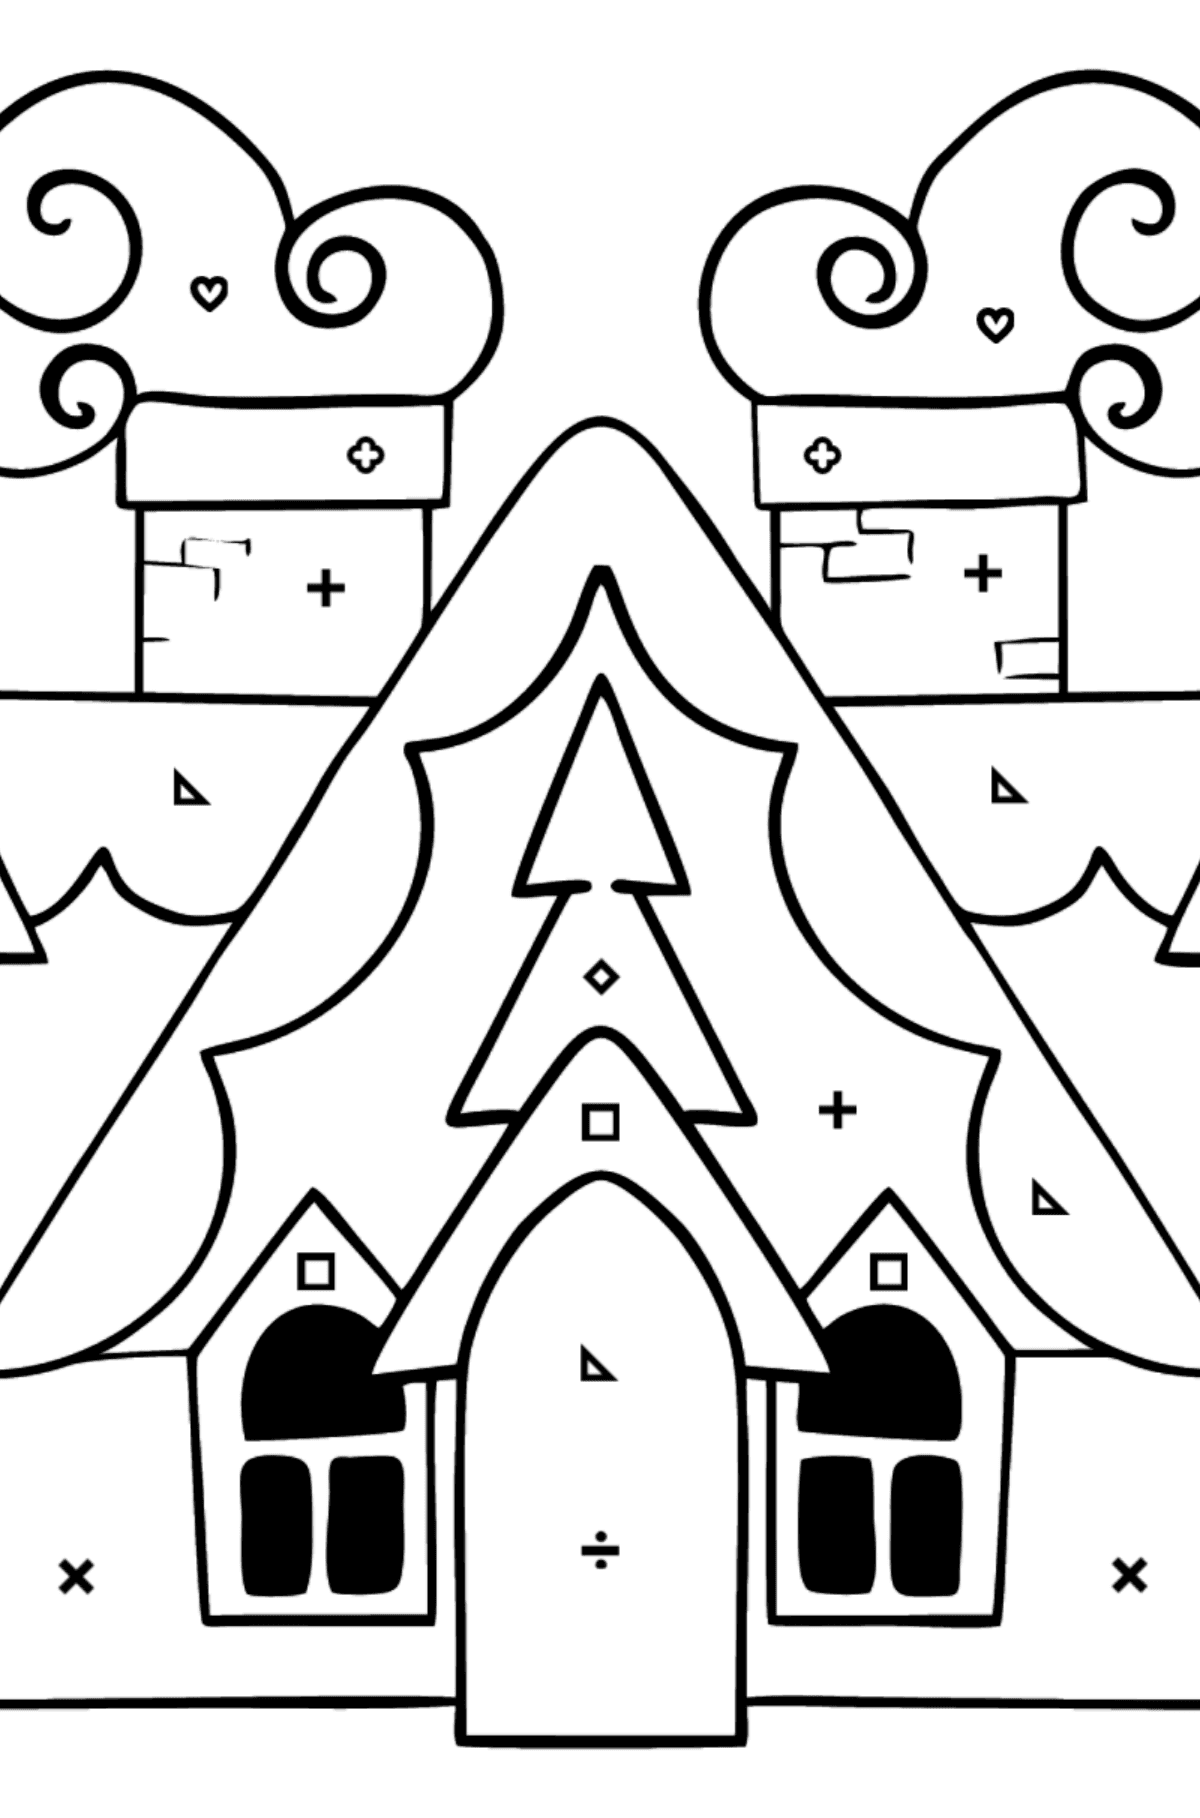 Complex Coloring Page - A Magic House - Coloring by Symbols and Geometric Shapes for Kids